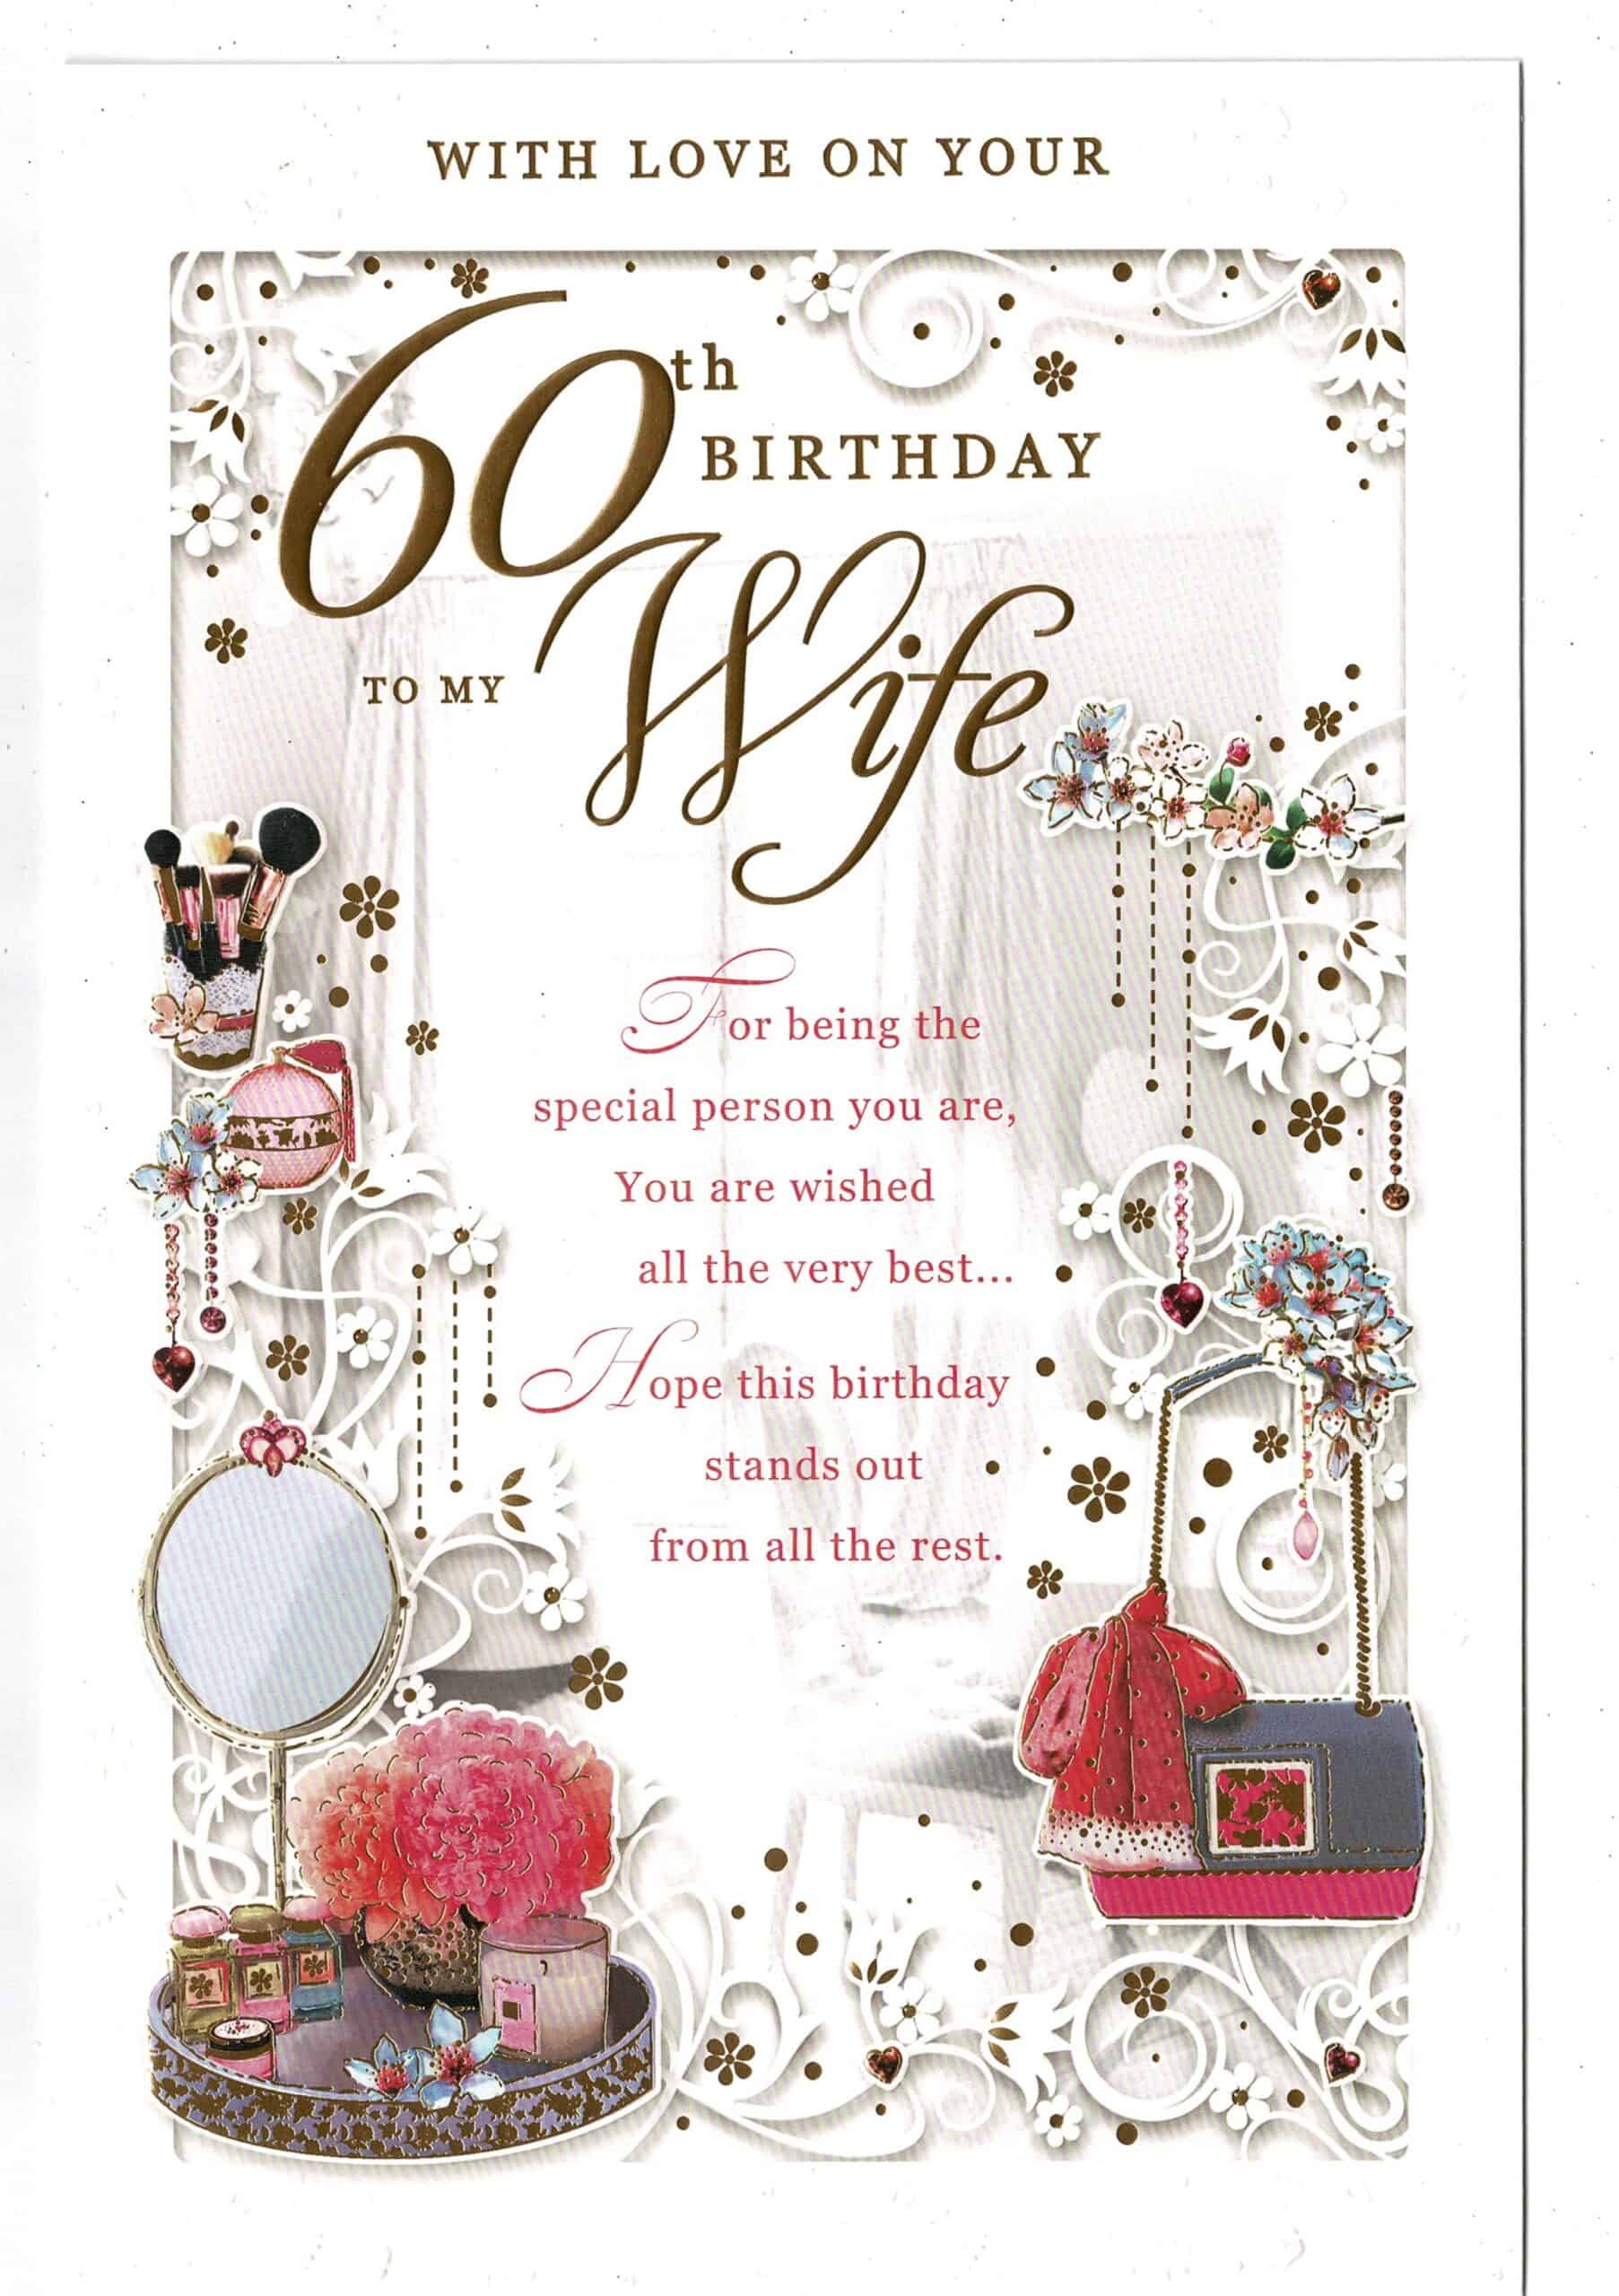 what to get wife for 60th birthday